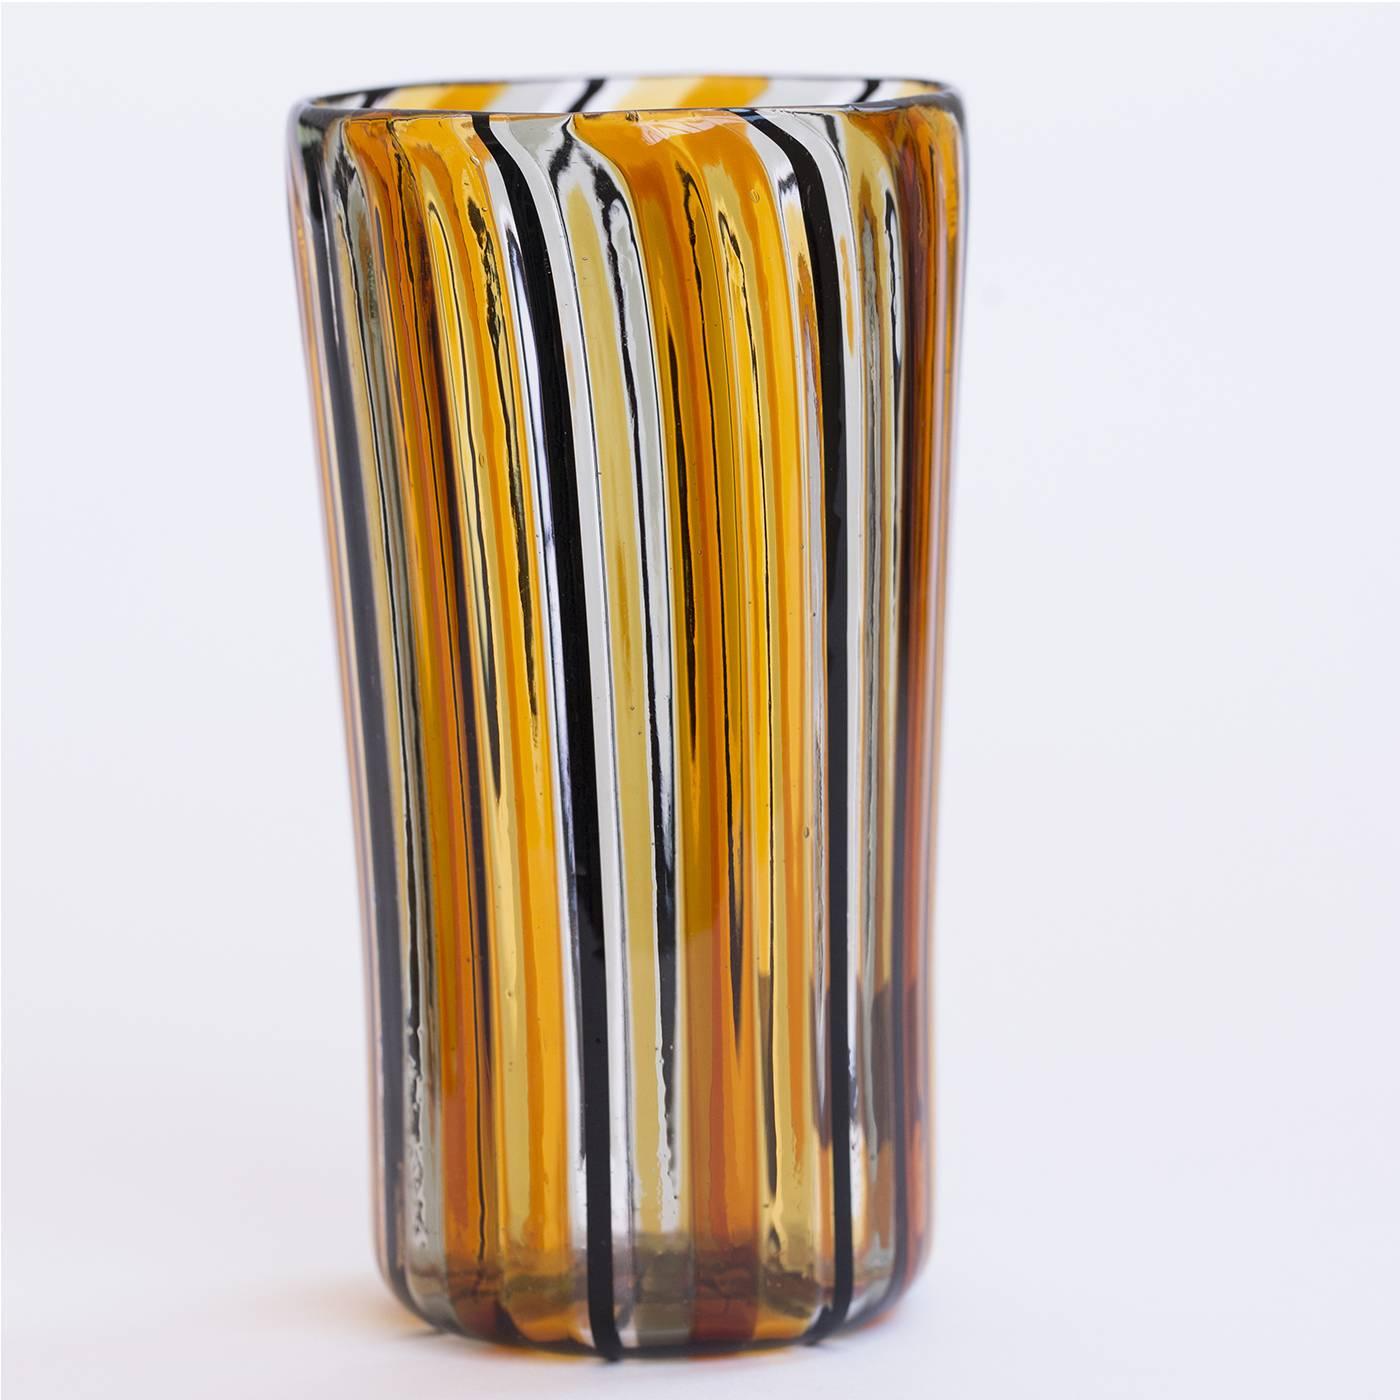 Set of 12 Murano glasses made with the 'a Canna' technique, where canes of colored glass are melted into a clear glass base. This beautiful amber and black set includes six water and six wine glasses entirely handcrafted on the Venetian island of